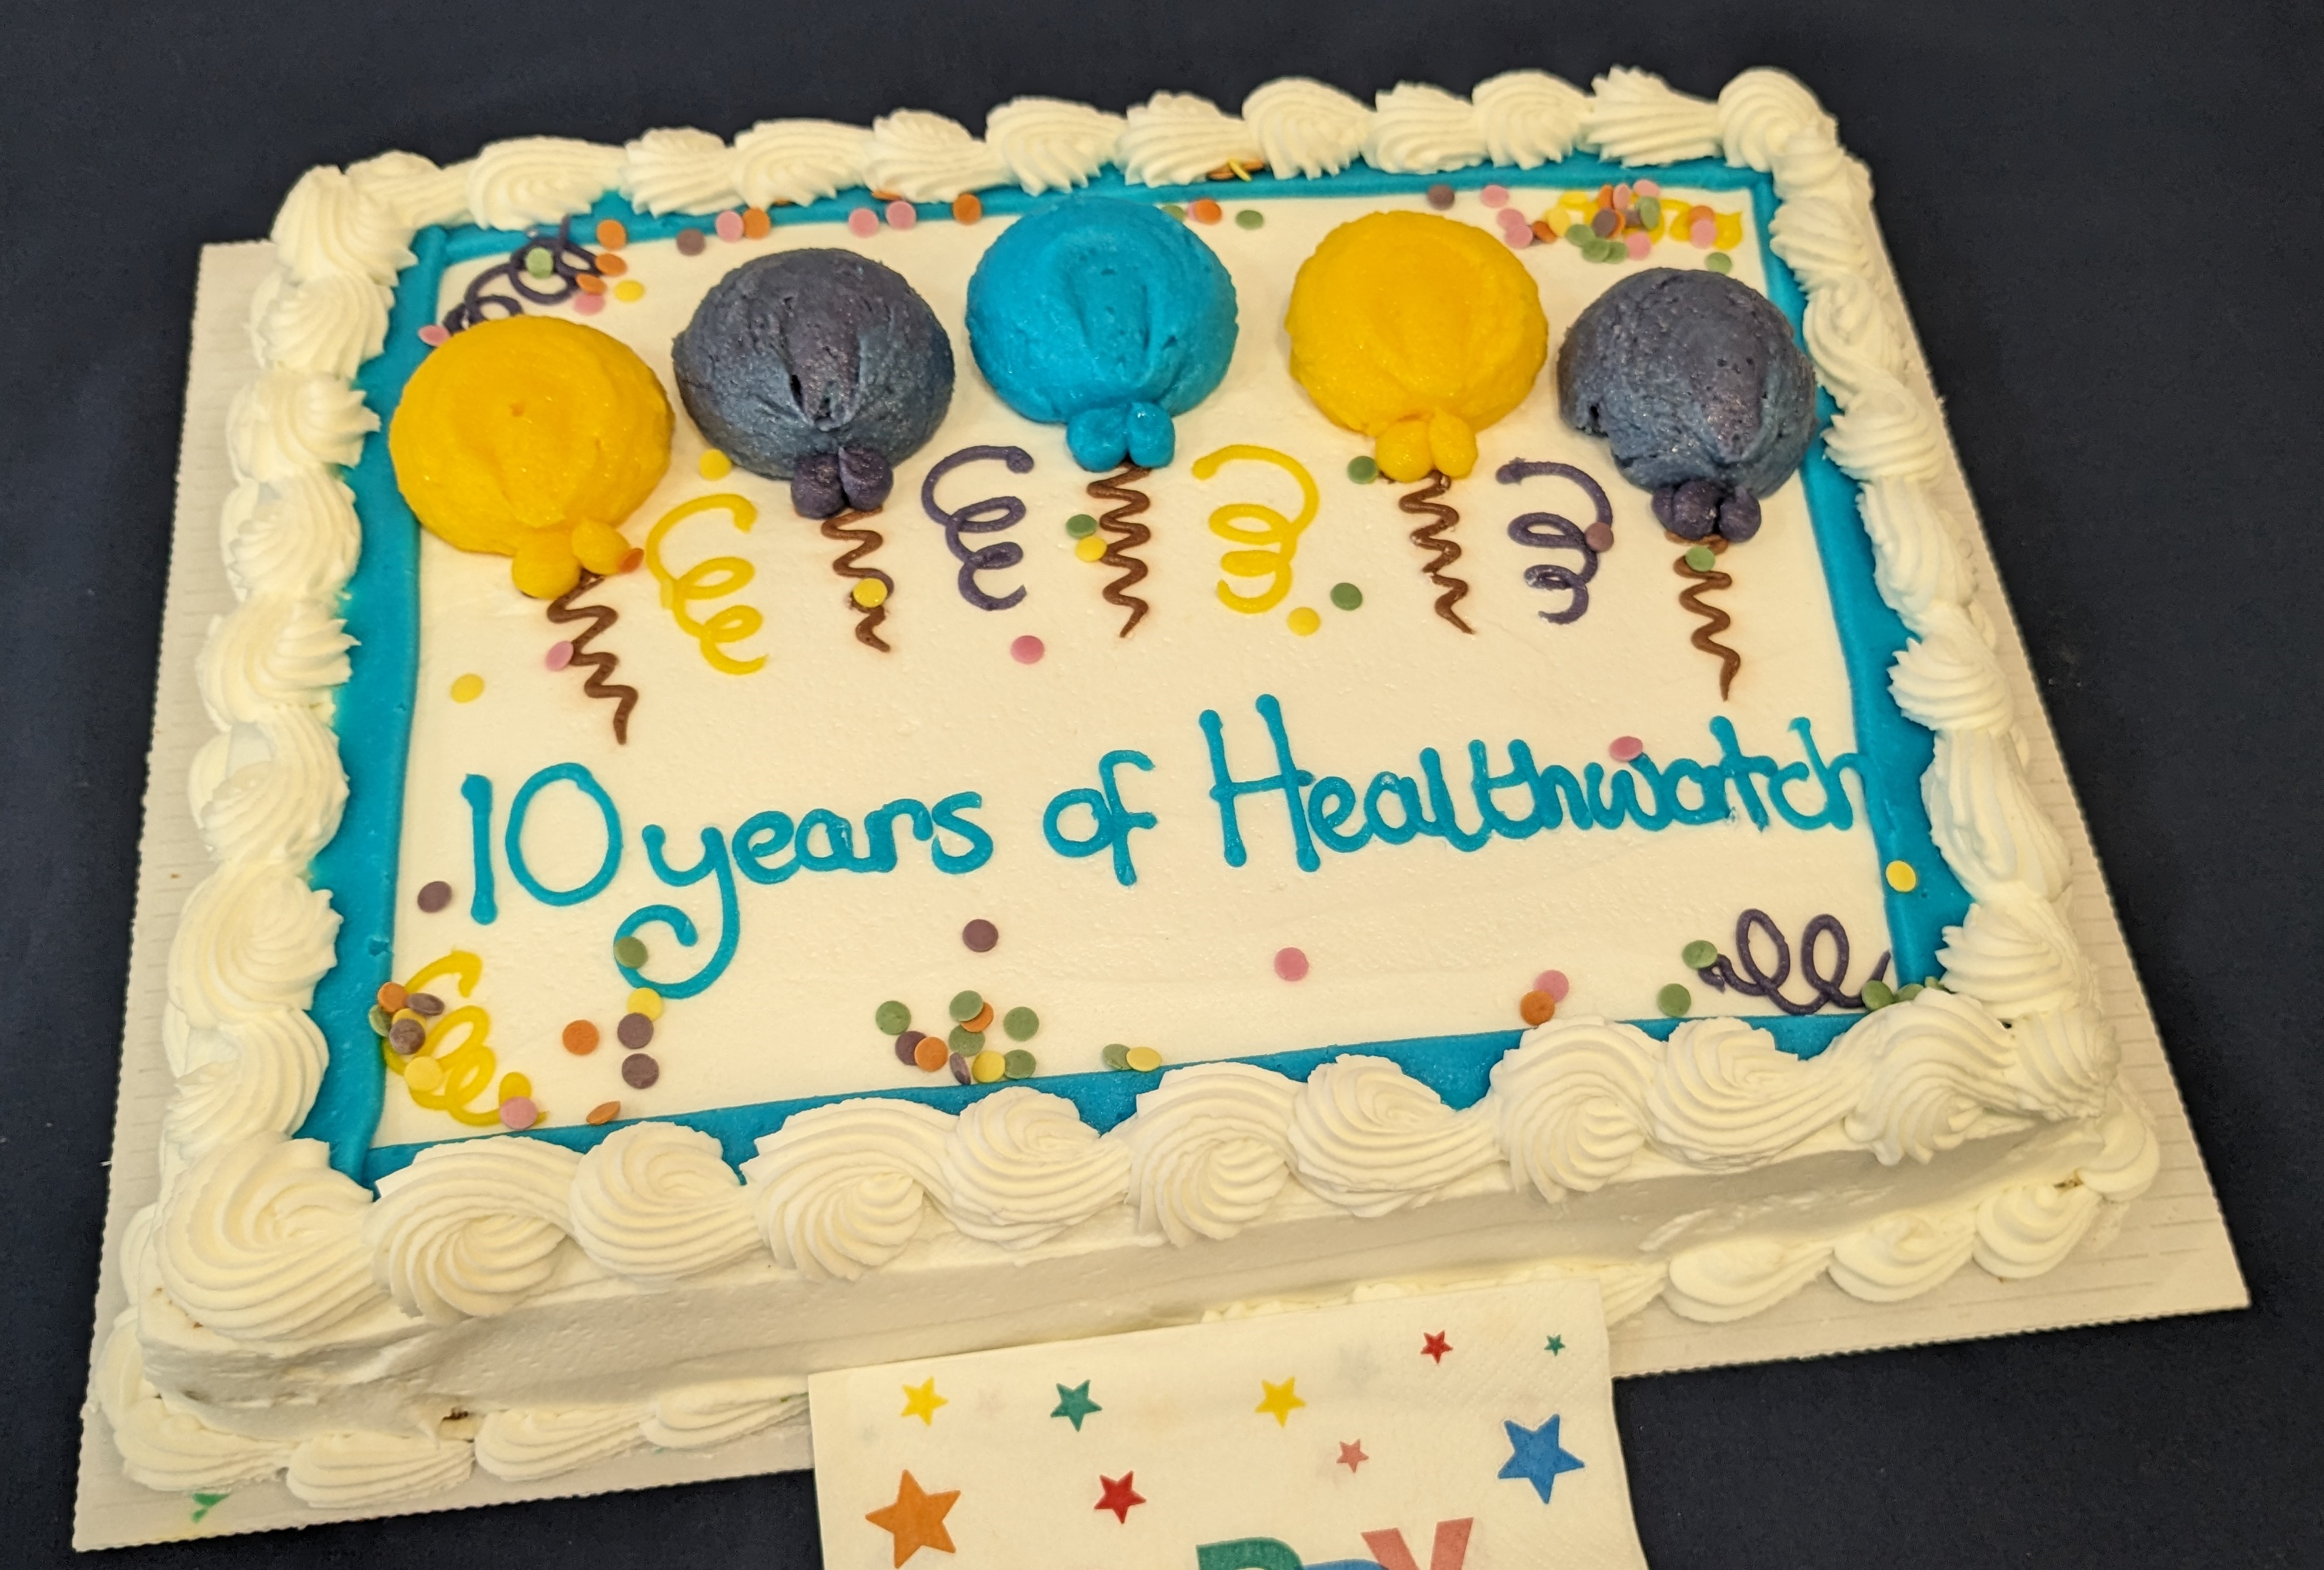 A large birthday cake iced with balloons and the words "10 years of Healthwatch"